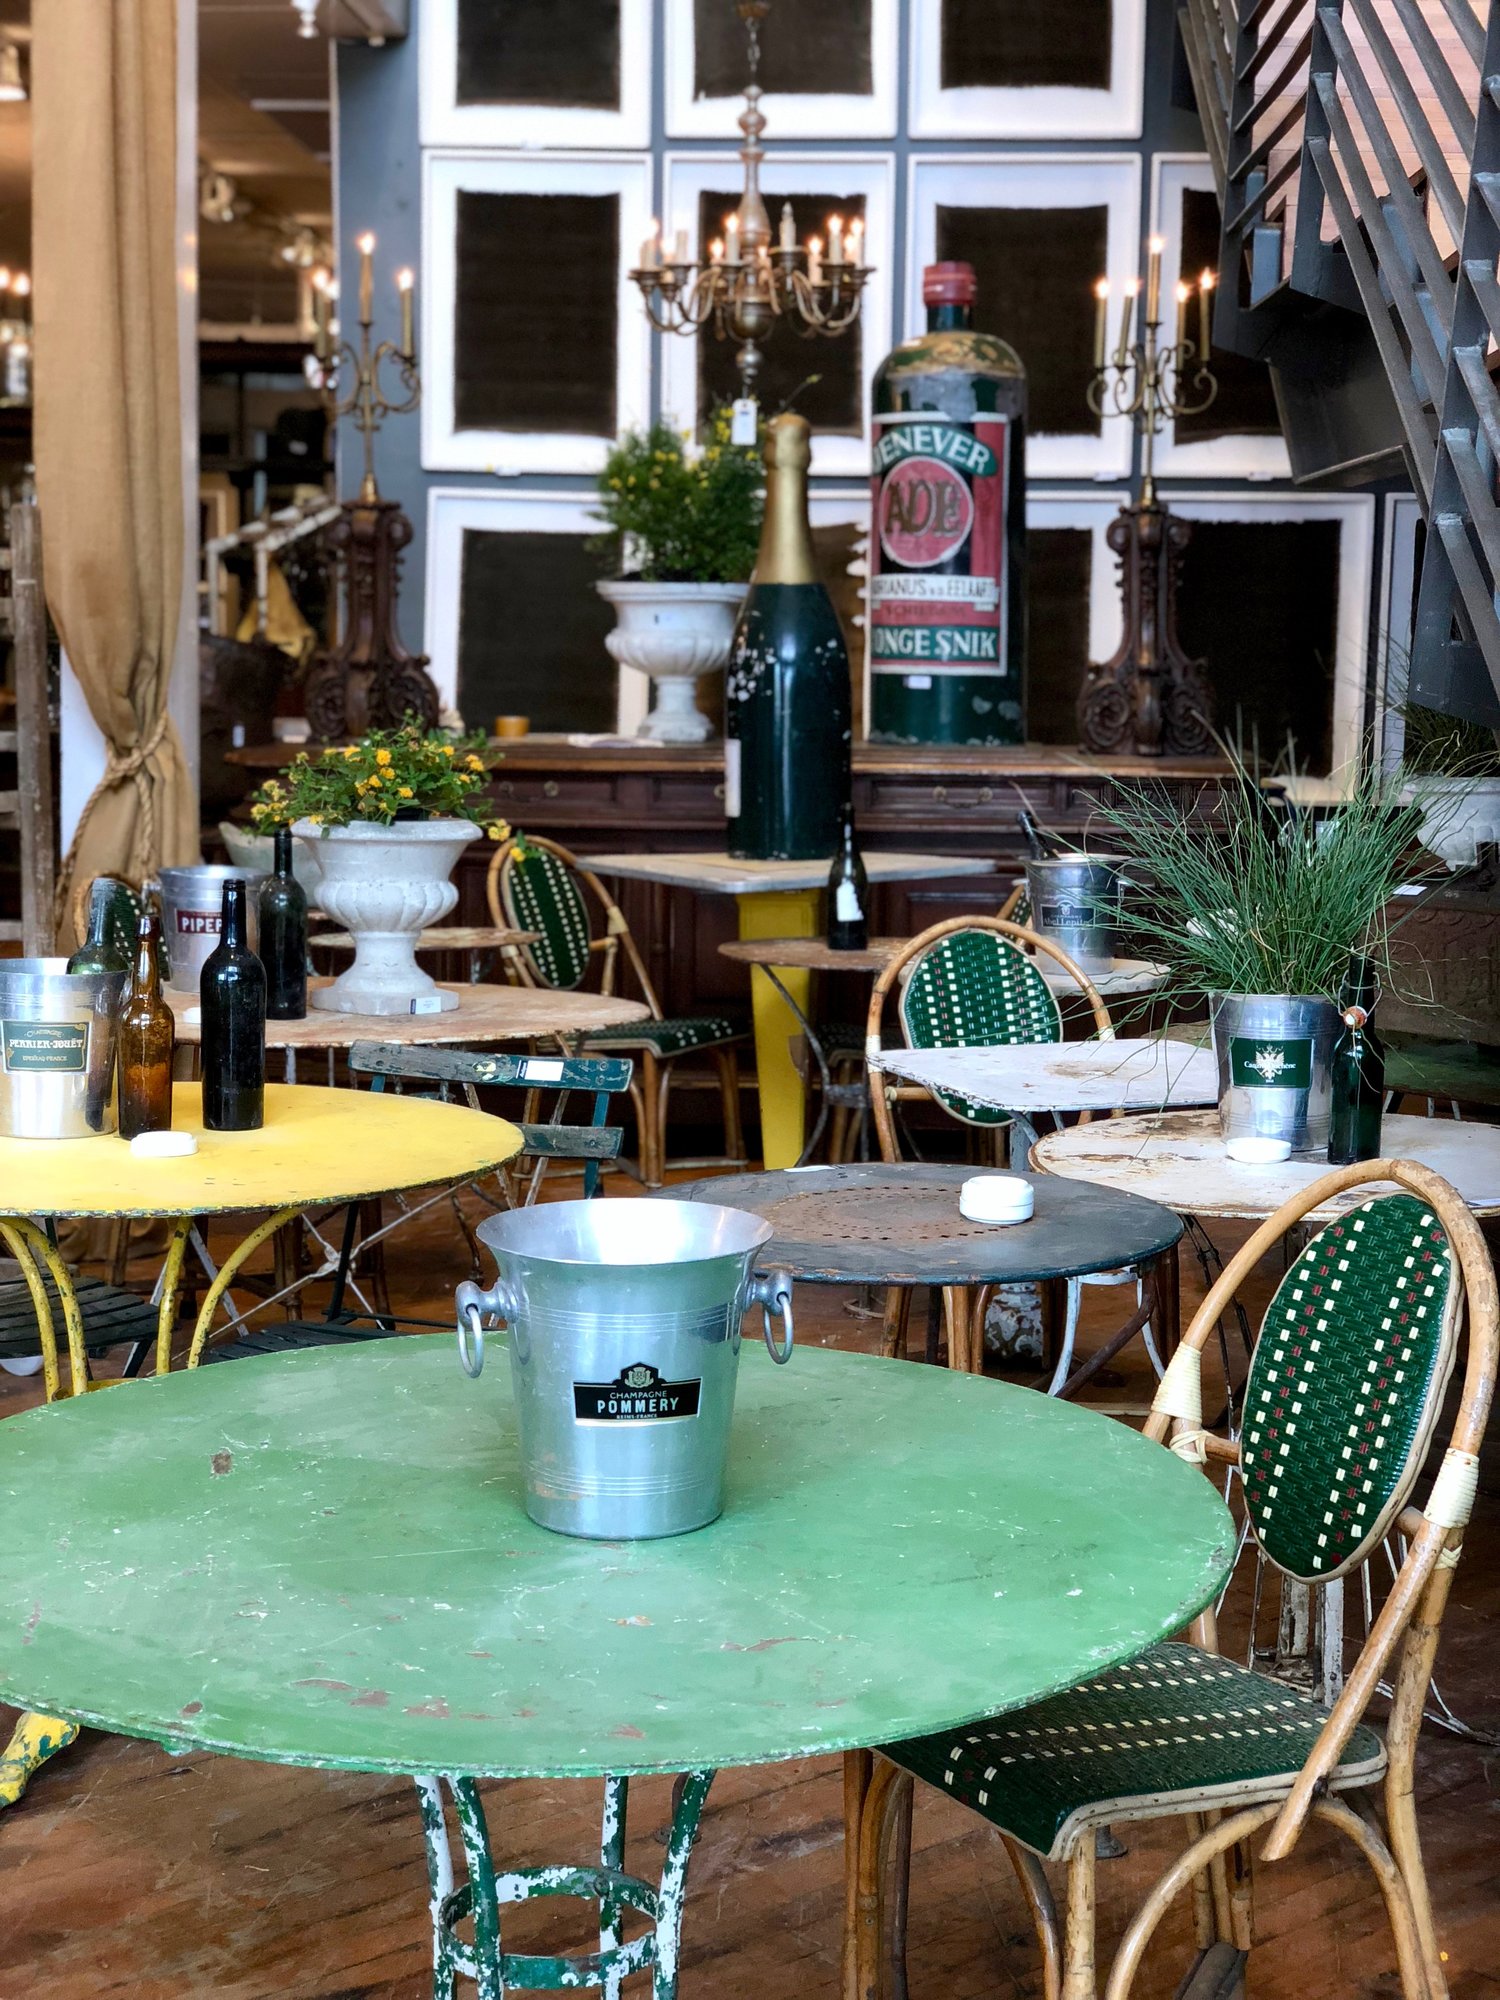  Bistro inspiration overload -- the planters on tables, green chairs, endless character -- why has color become such a naughty word in interiors?&nbsp; I miss it!&nbsp; Let's all agree to bring back color. 